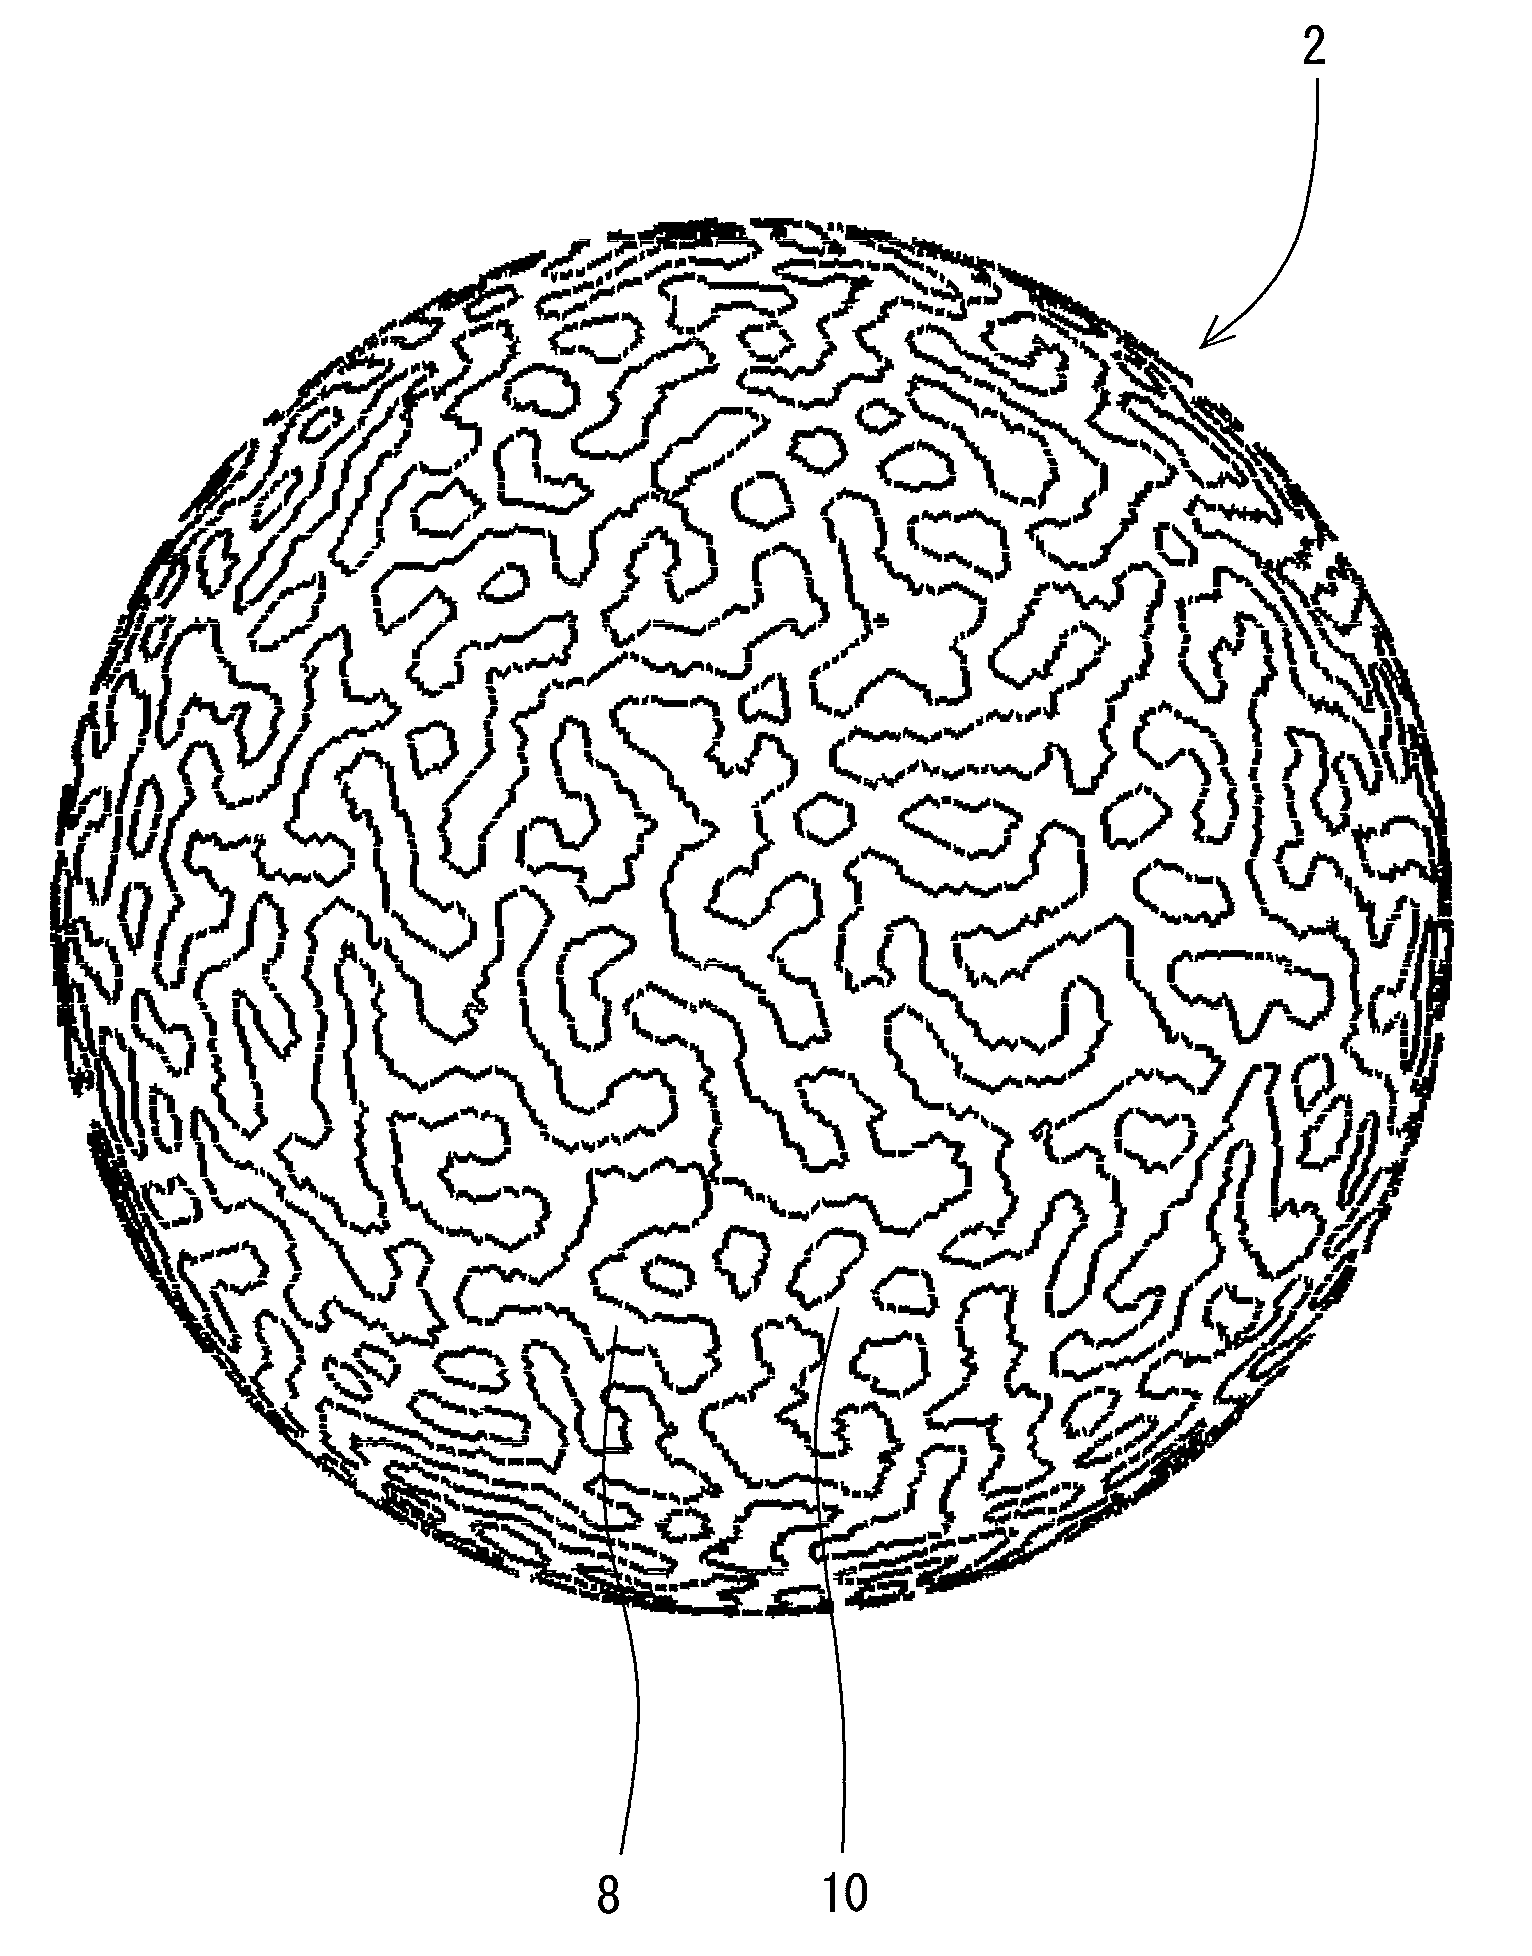 Process for designing rugged pattern on golf ball surface